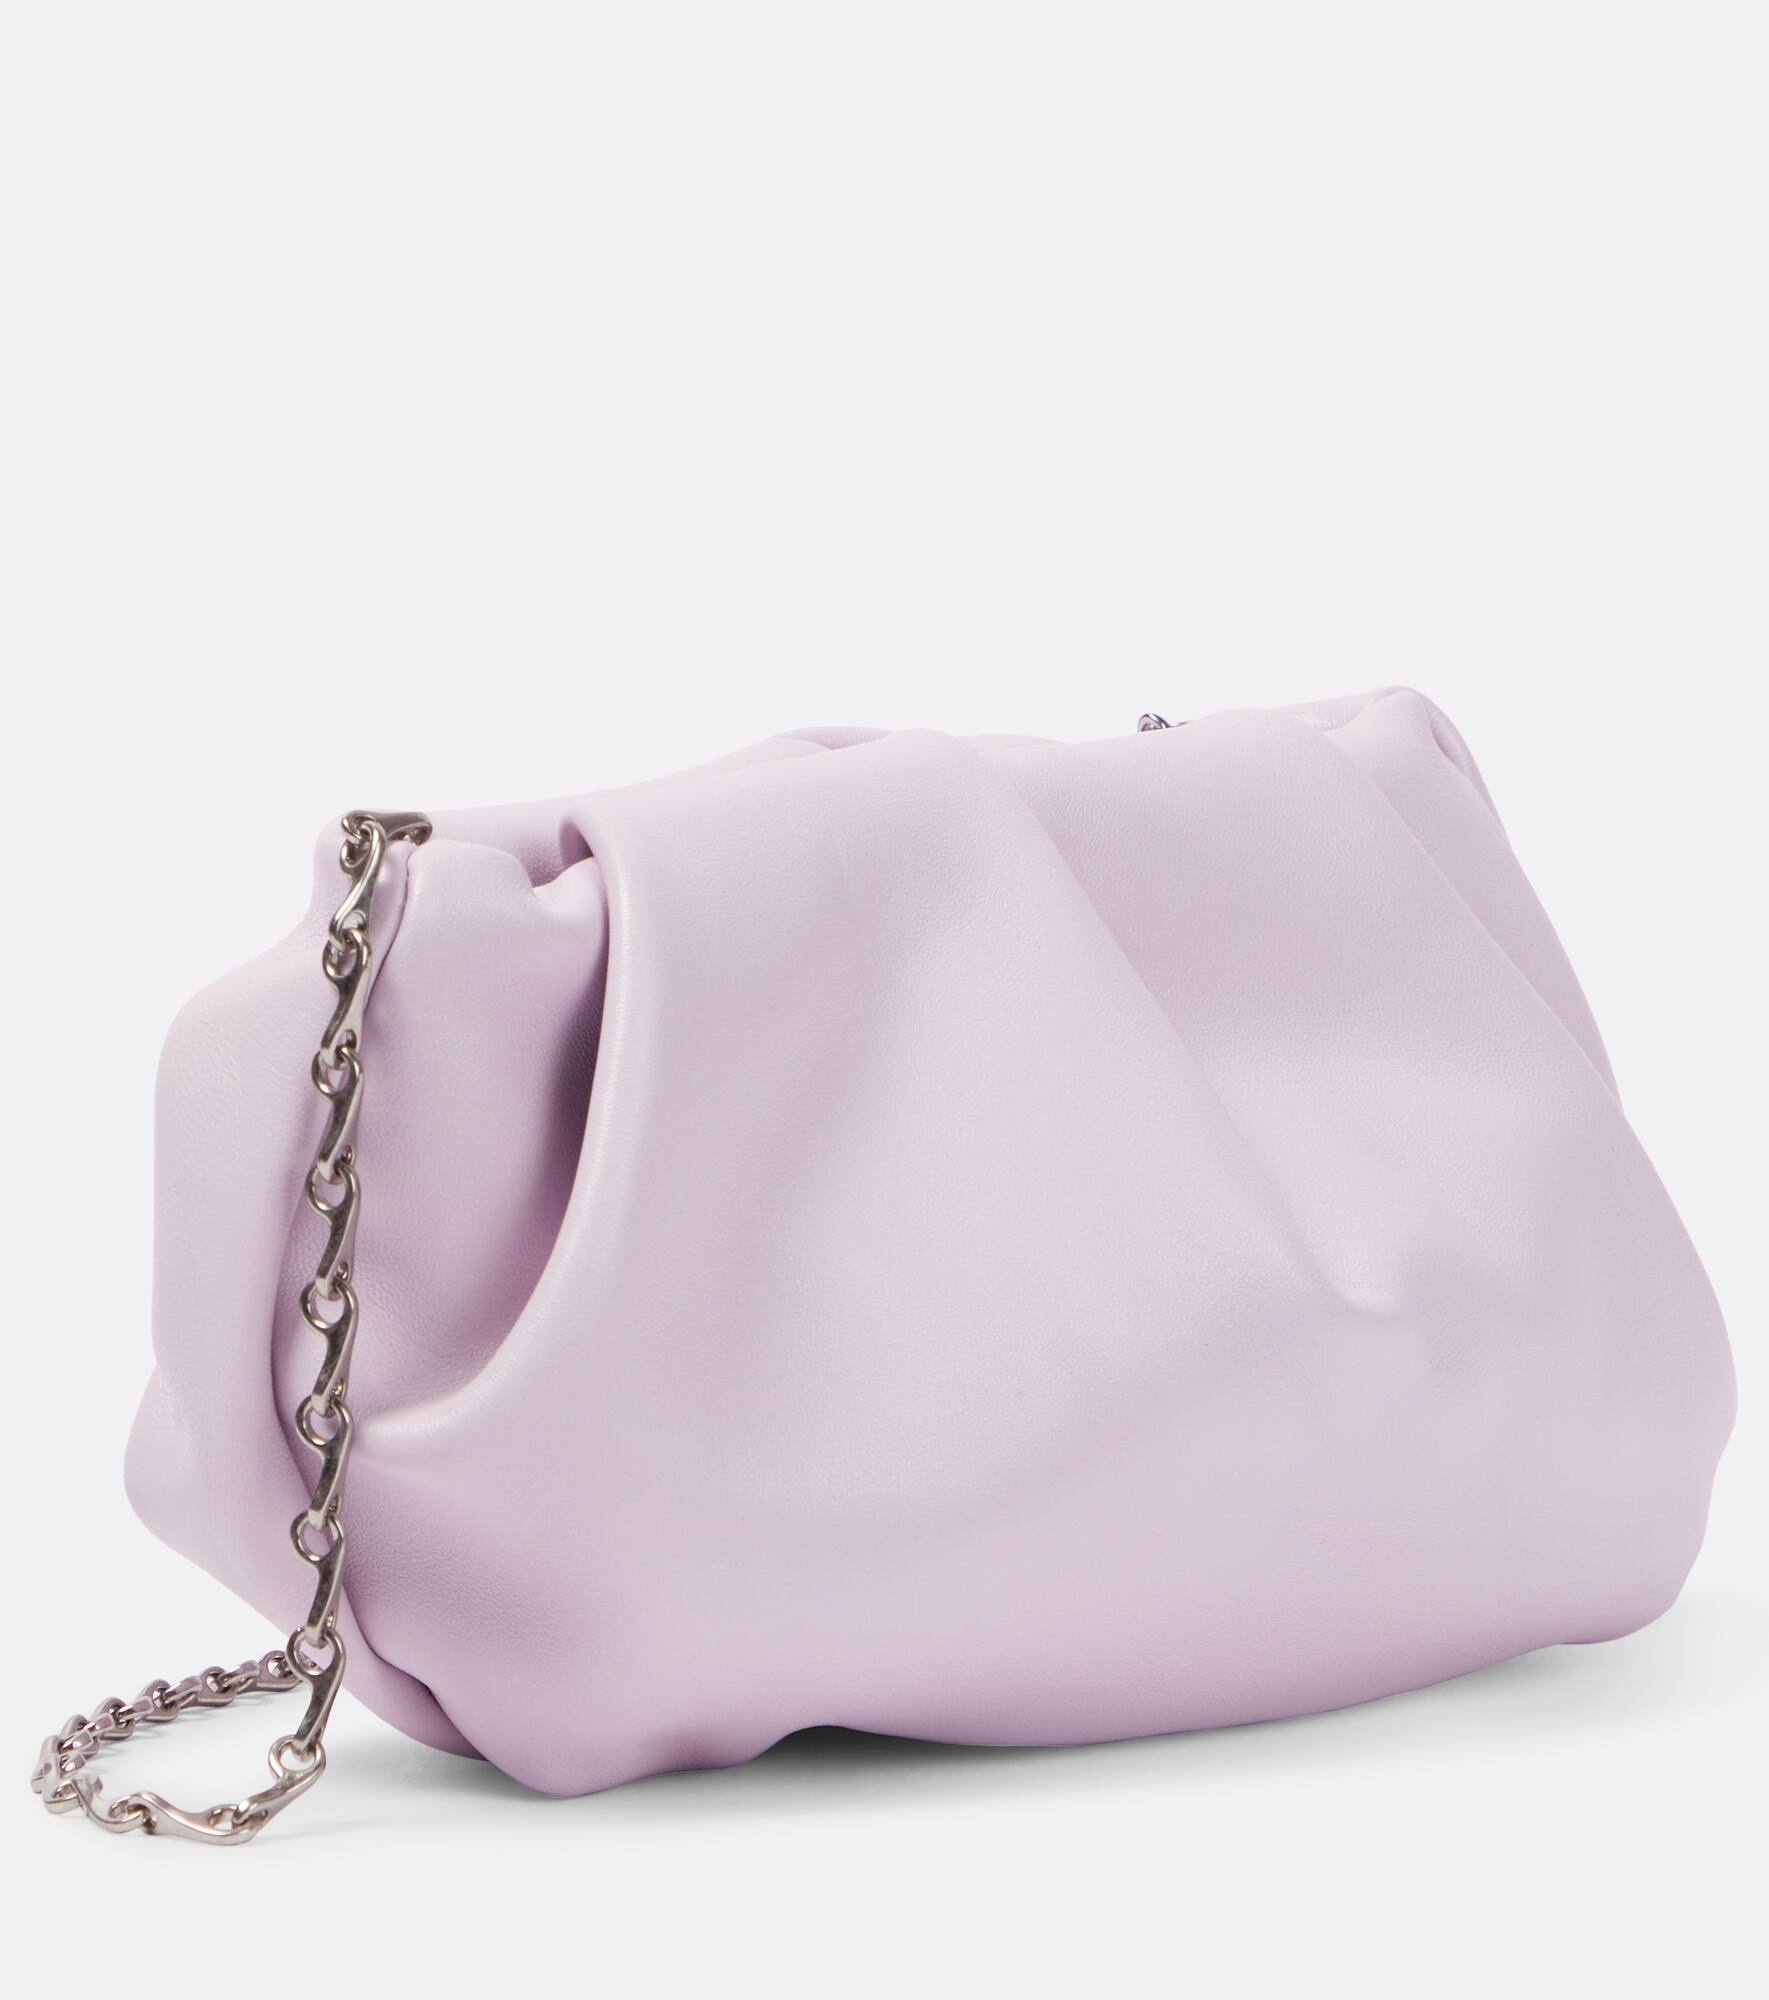 Rose leather clutch - 4